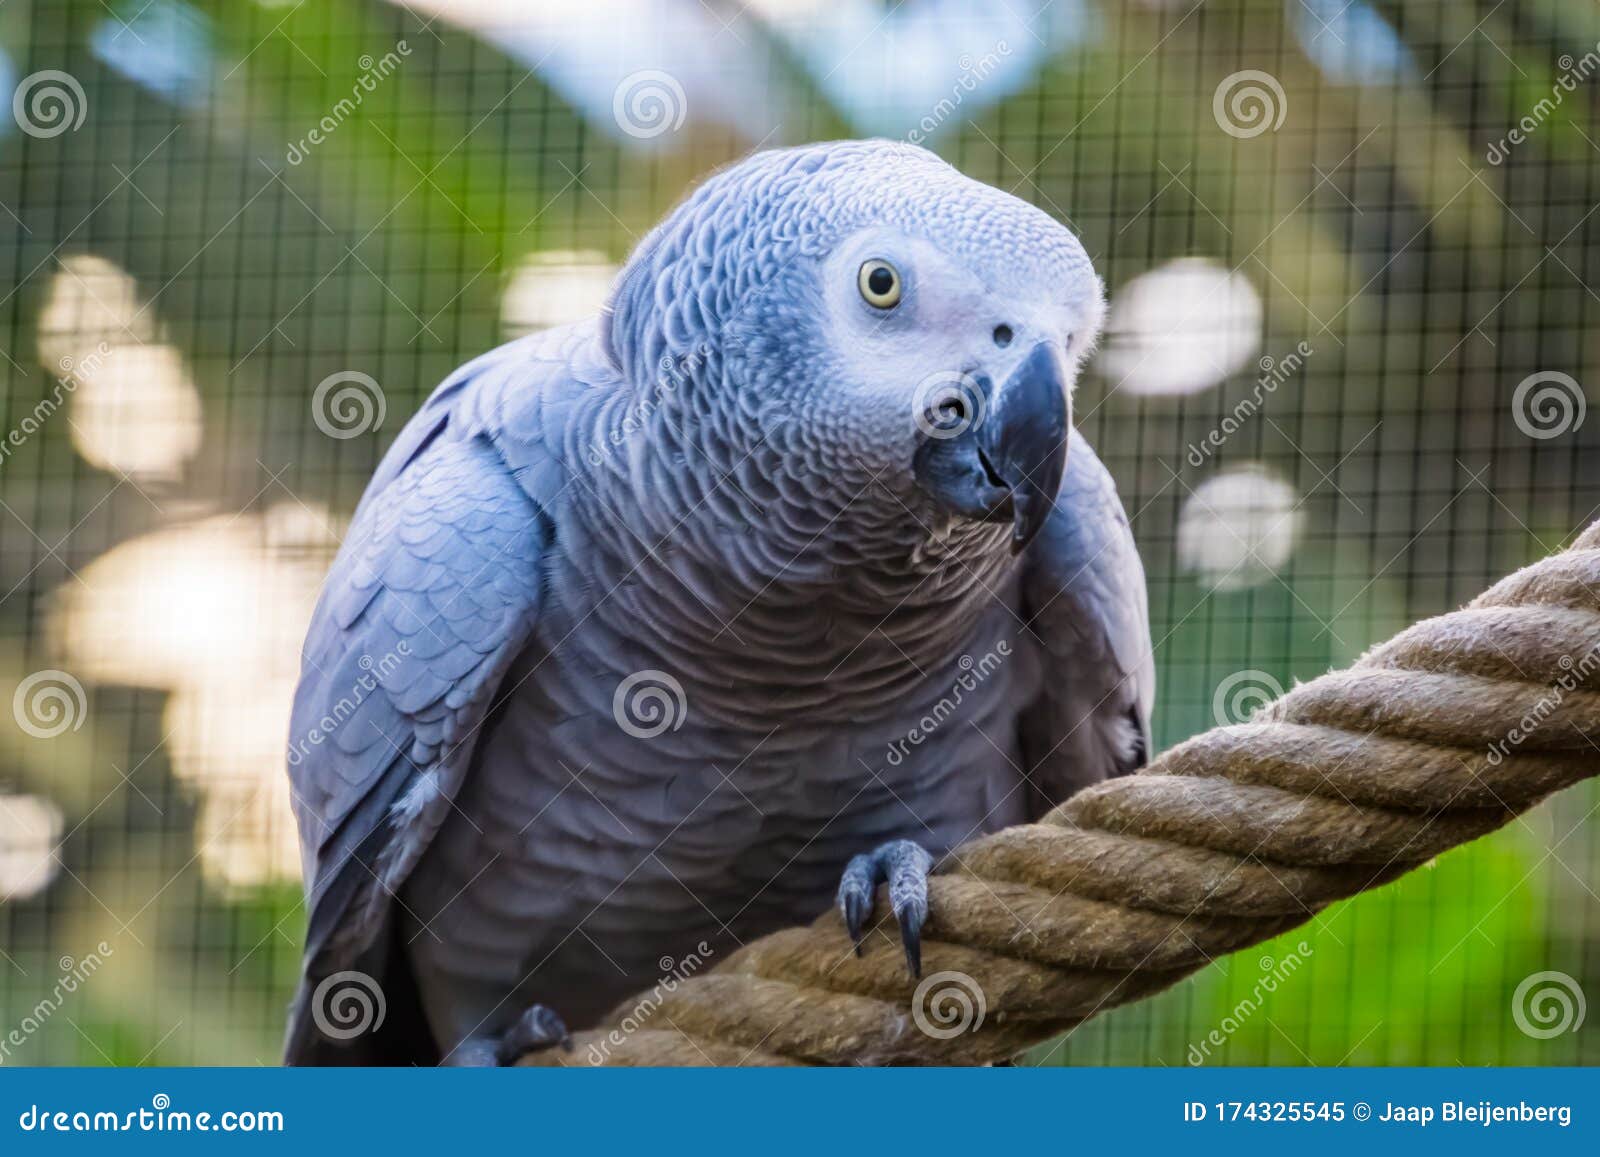 Funny Closeup of a Congo African Grey Parrot, Tropical Endangered Bird  Specie from Africa Stock Image - Image of aviculture, gray: 174325545